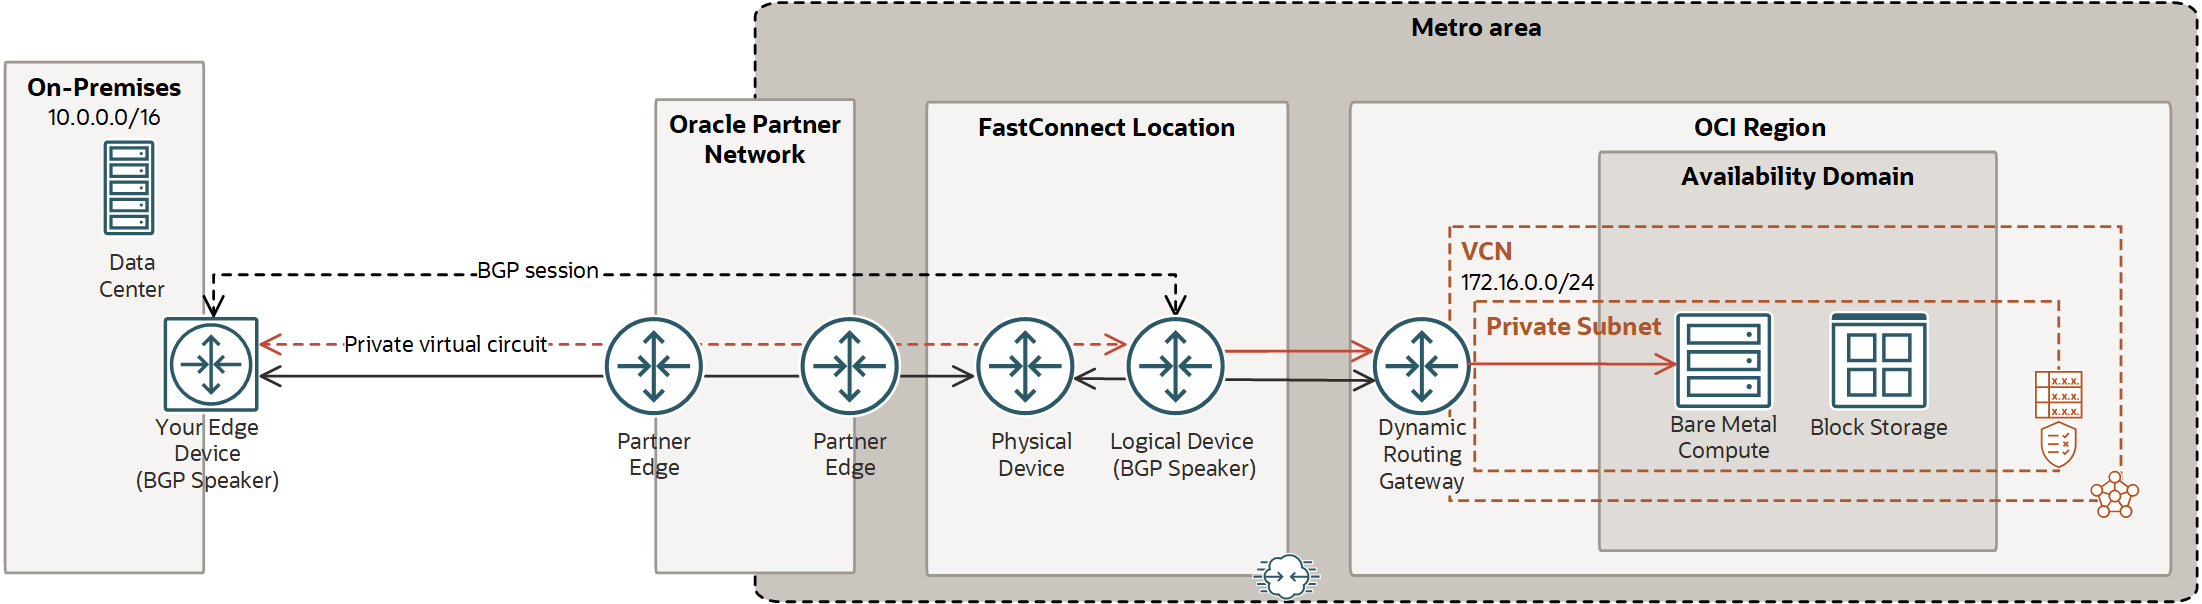 This image shows the BGP session between the customer's edge router and Oracle